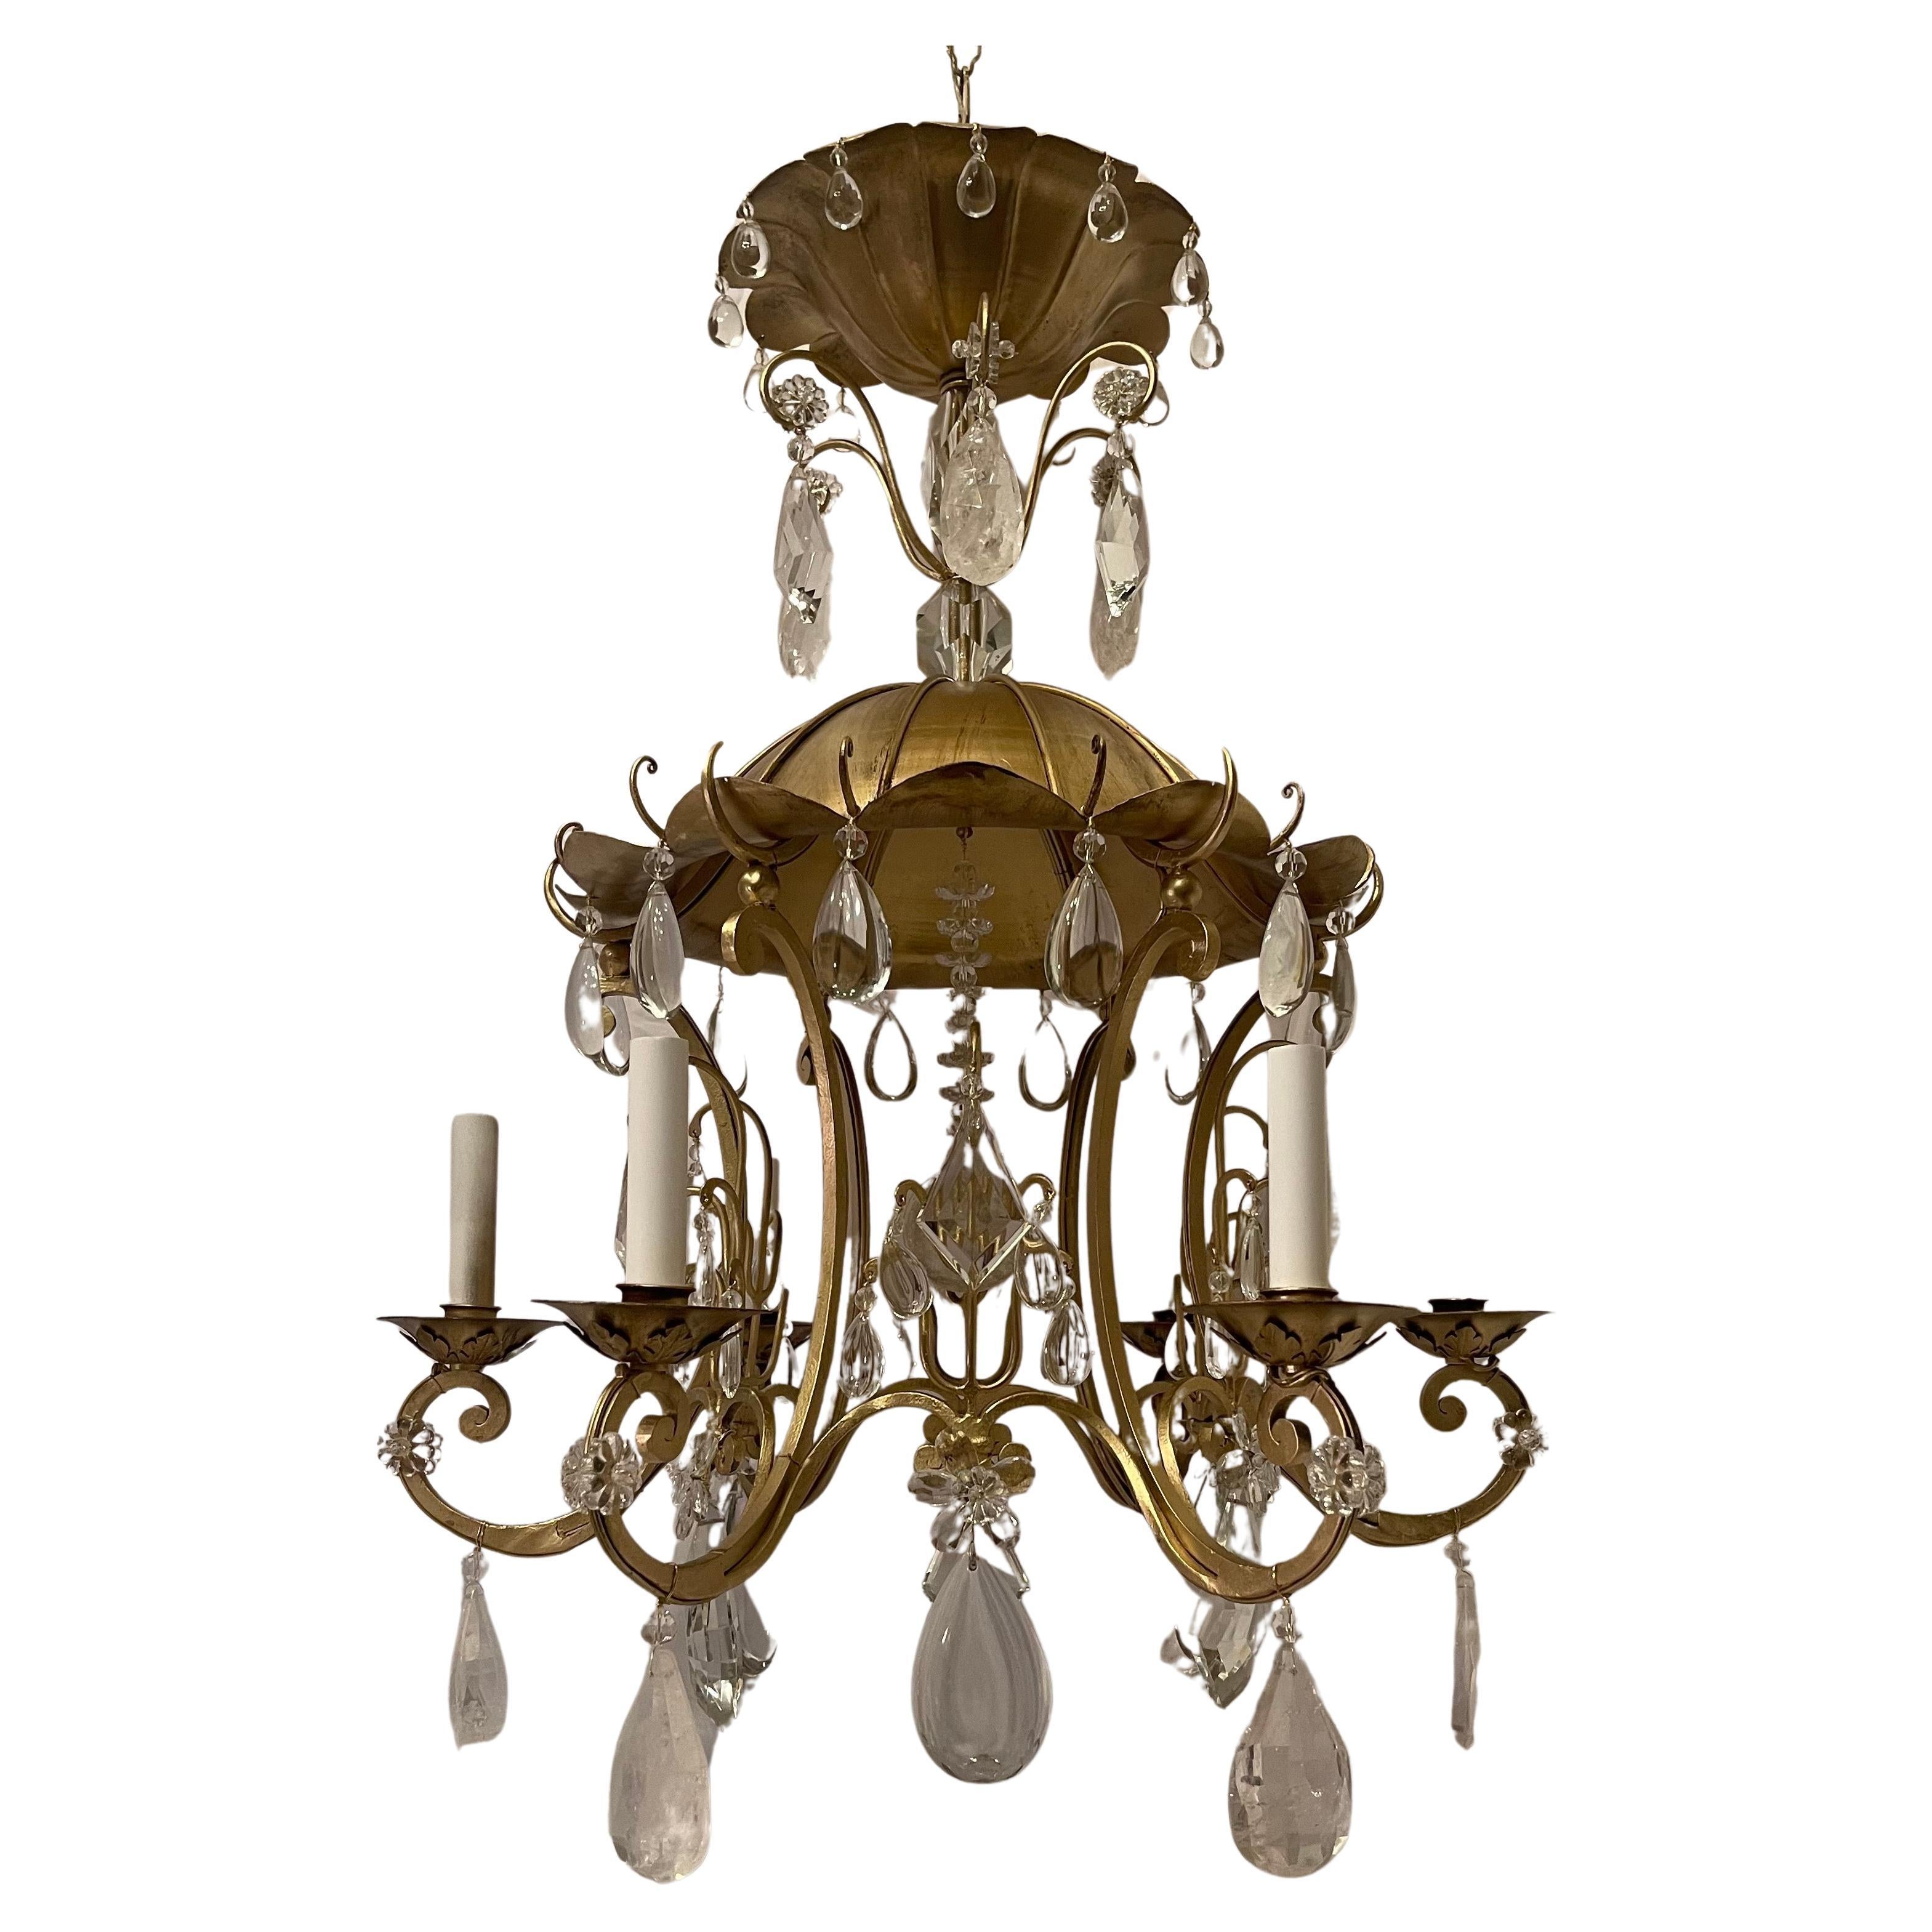 A Wonderful Maison Baguès Style Gold Gilt Pagoda / Chinoiserie Form Chandelier Adorned With Alternating Rock Crystal And Crystal Drops And Having A Rock Crystal Center Ball, This Beautiful Vintage Chandelier Has 6 Candelabra  Lights That Have Been